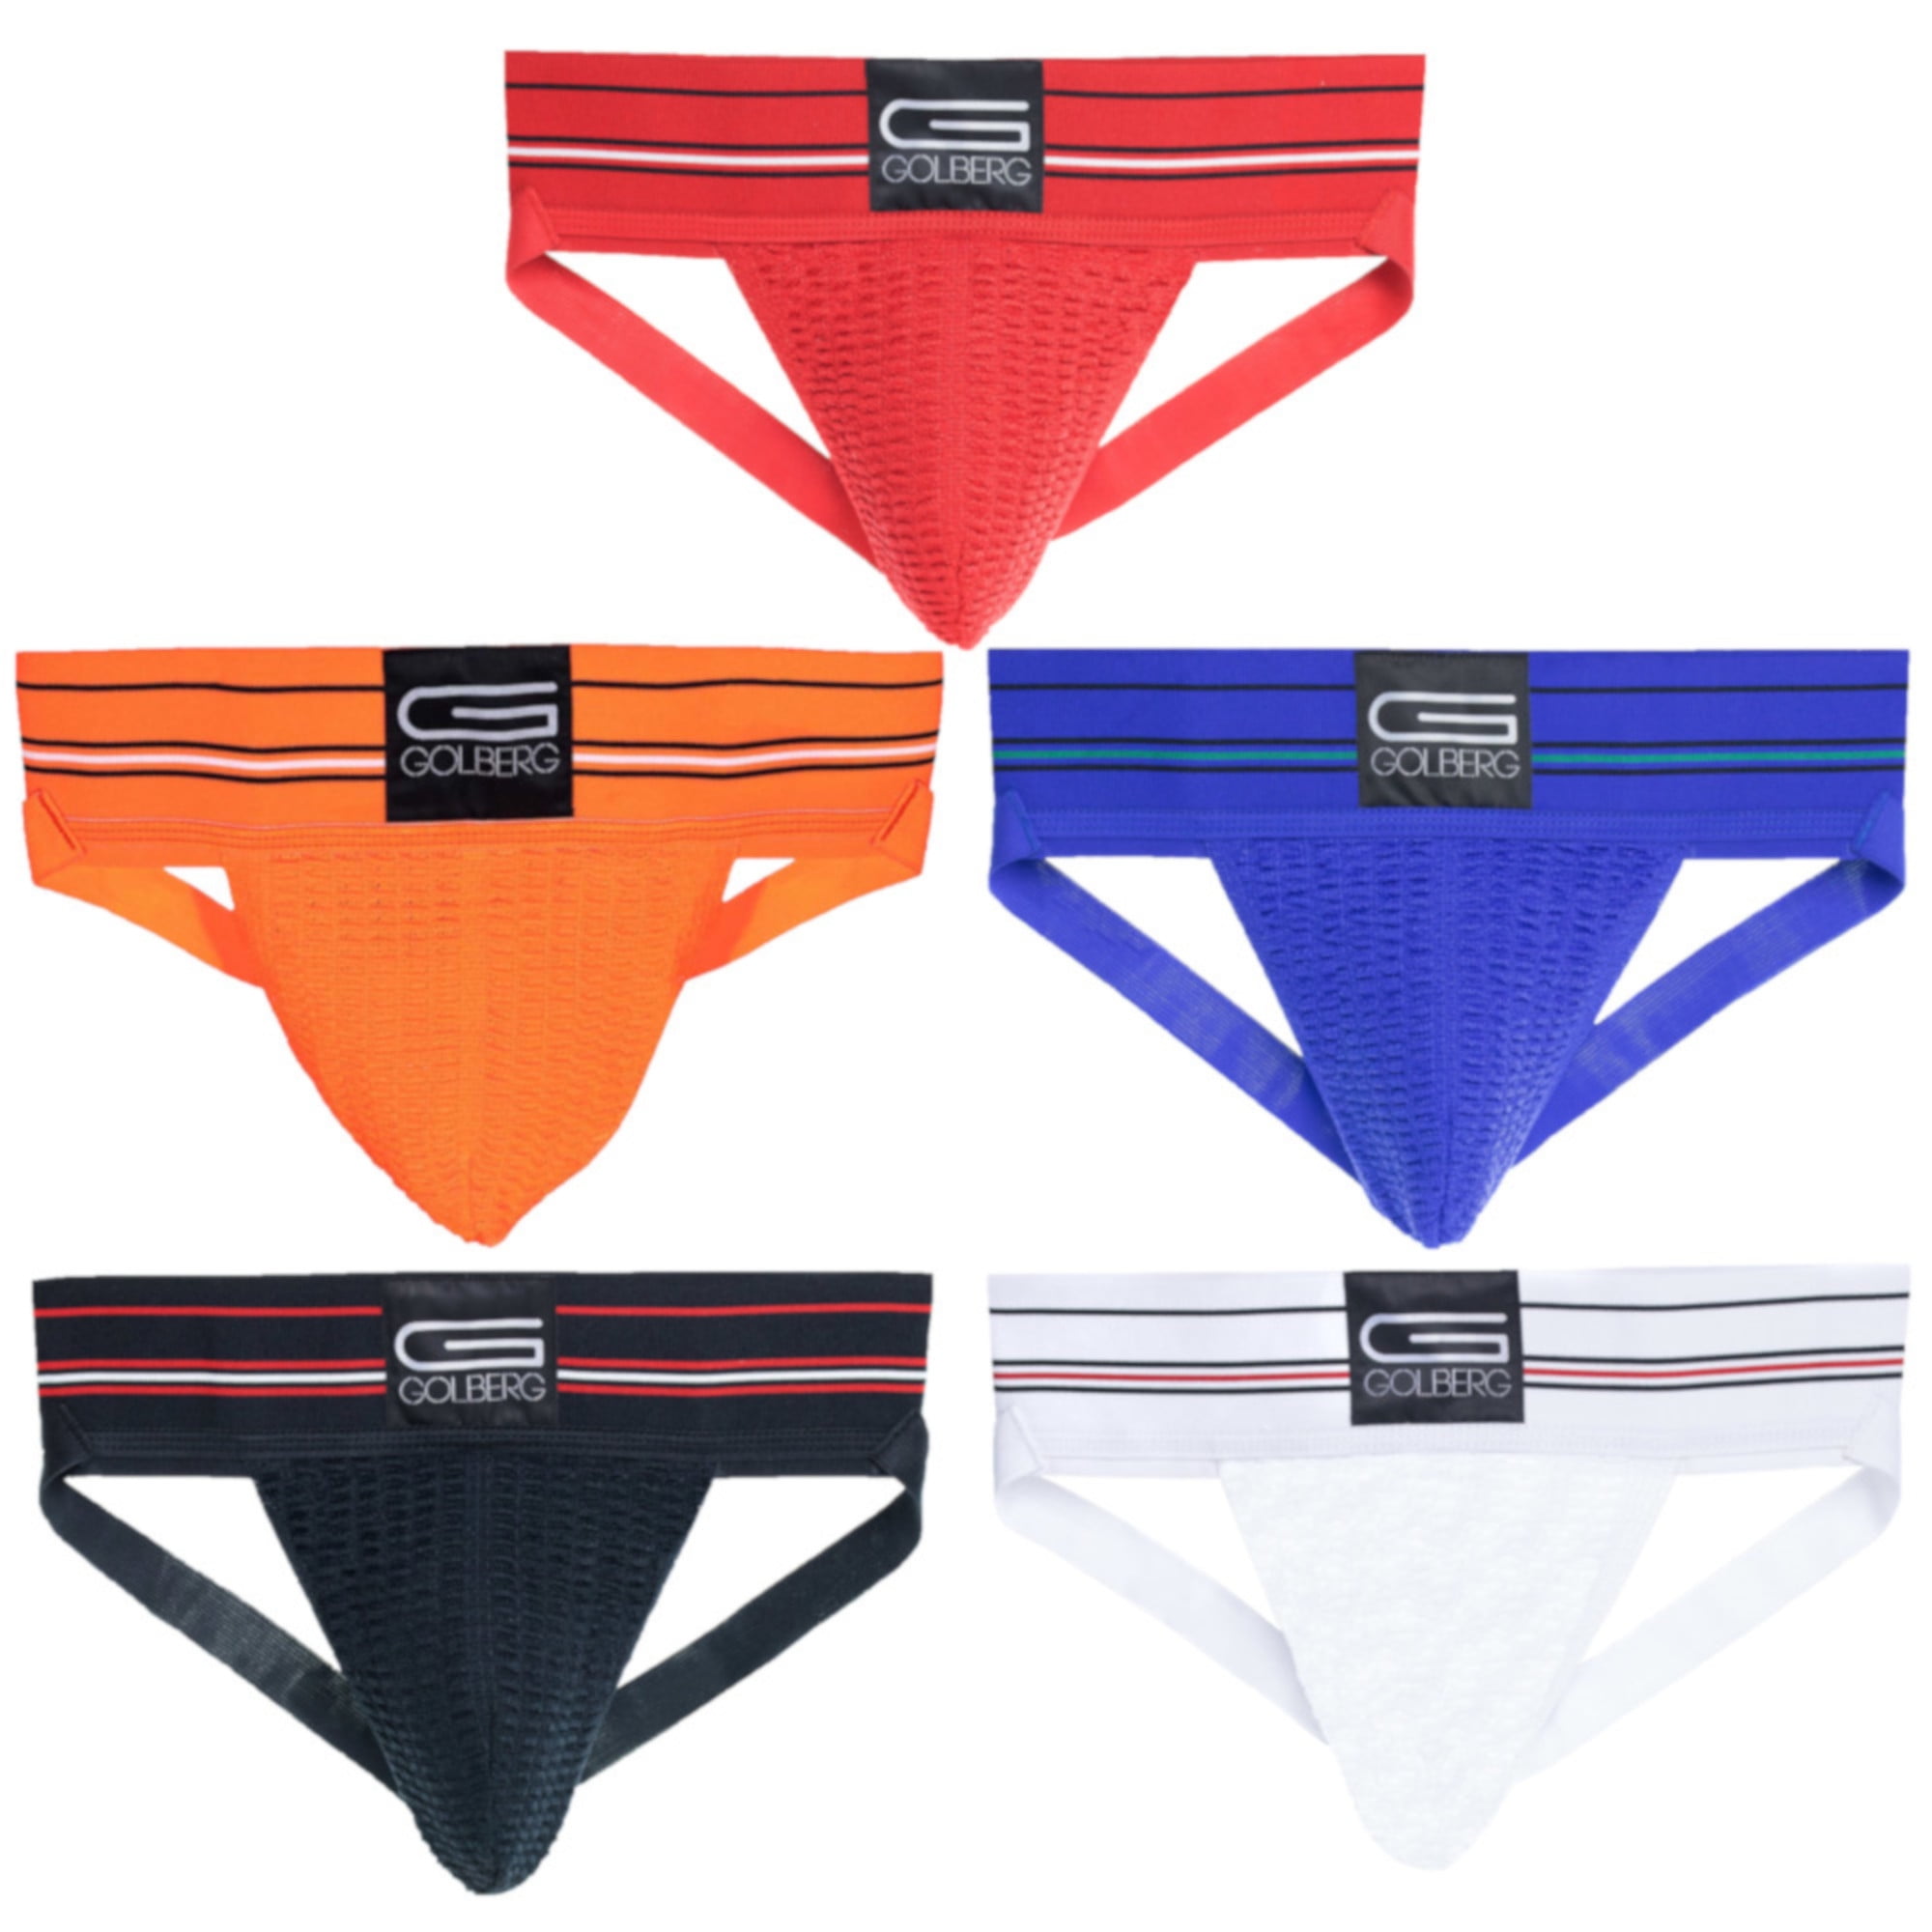 Bike Adult Supporter Bike Size M Briefs for Swimming/Jogging Red/Grey 